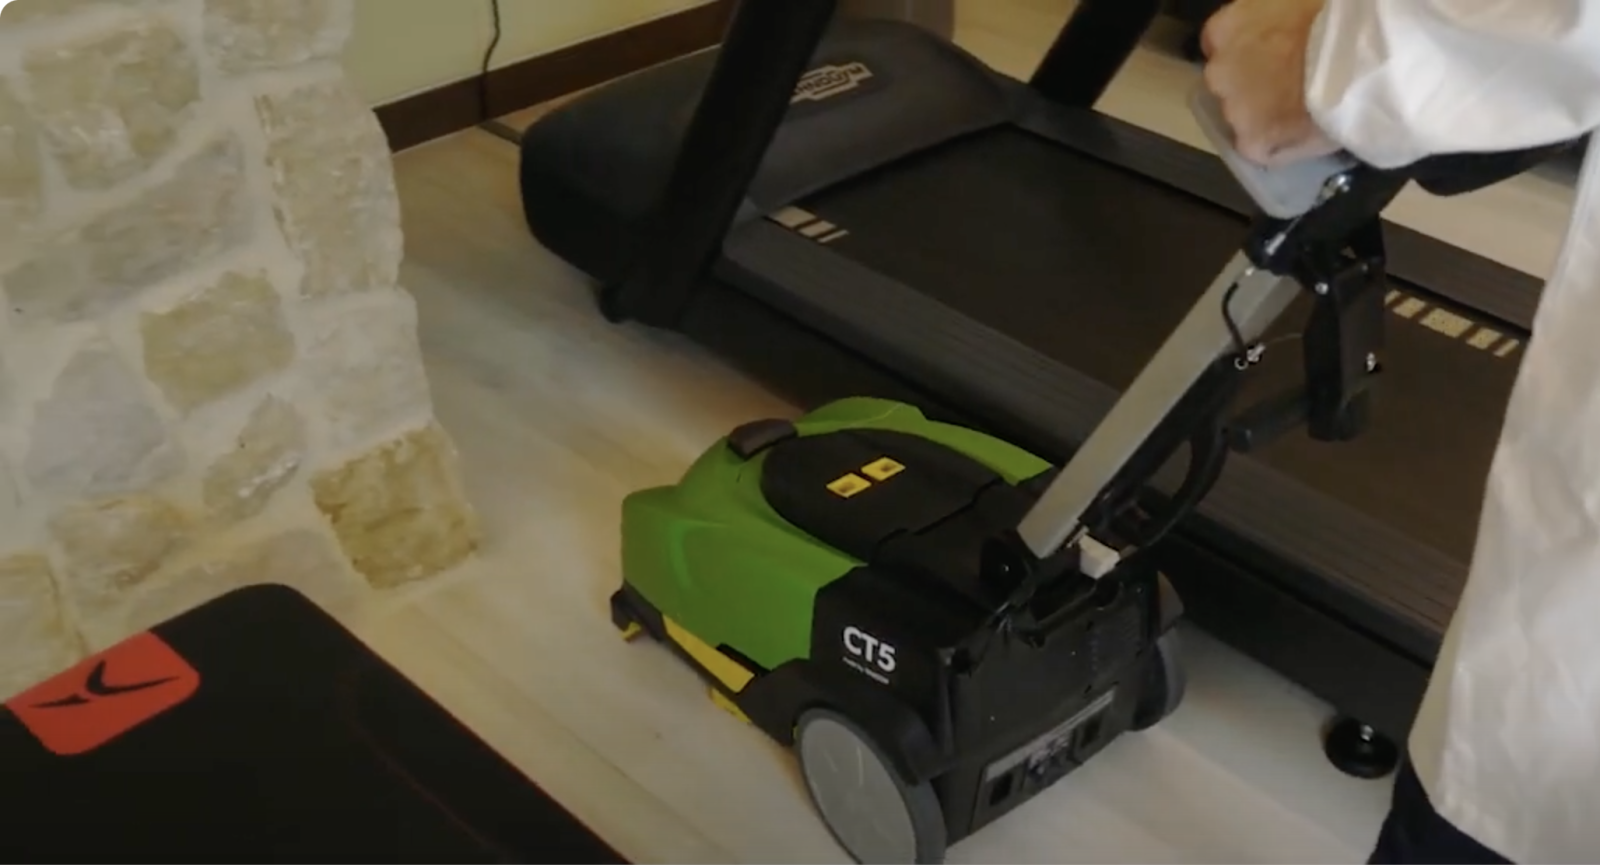 Gym Floor Cleaning with CT5 Floor Scrubber